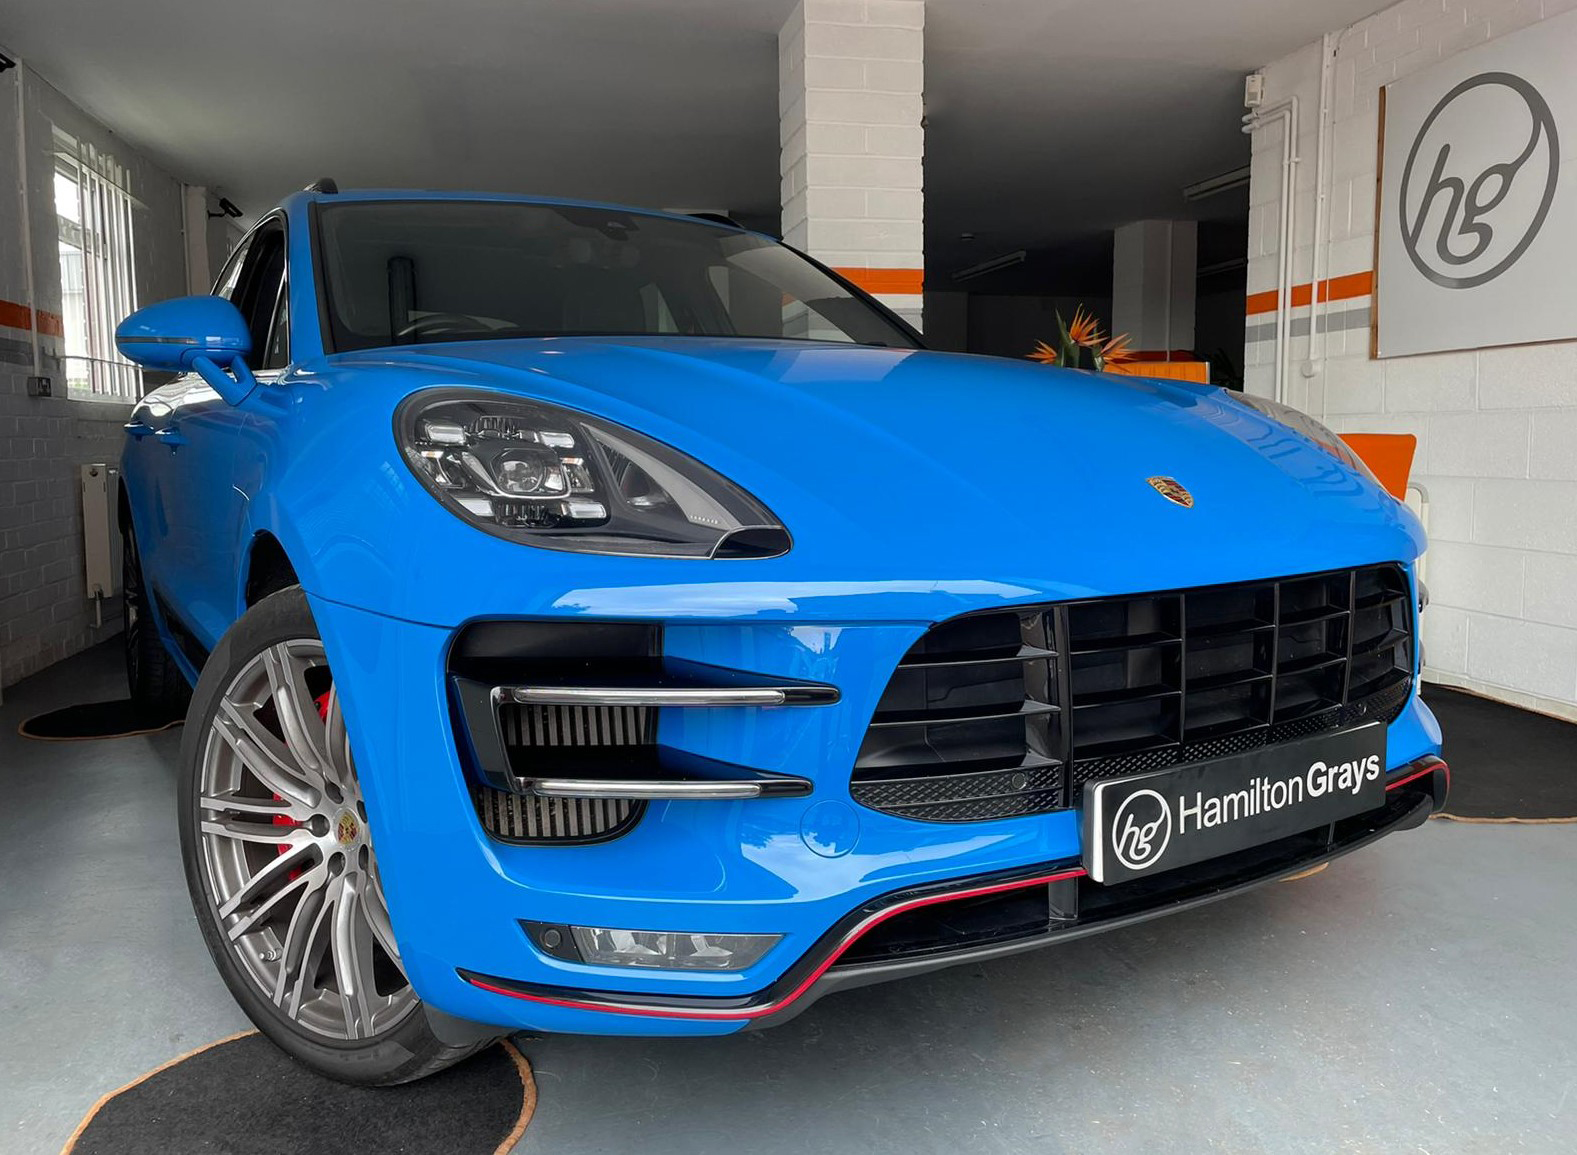 2018 (18) Porsche Macan 3.6T Turbo Performance Exclusive Edition PDK 4WD. In [PTS] Voodoo Blue with Black Leather and Alcantara. FPSH. 41k. Porsche Warranty 03/2023. Top Spec’.. (SOLD)